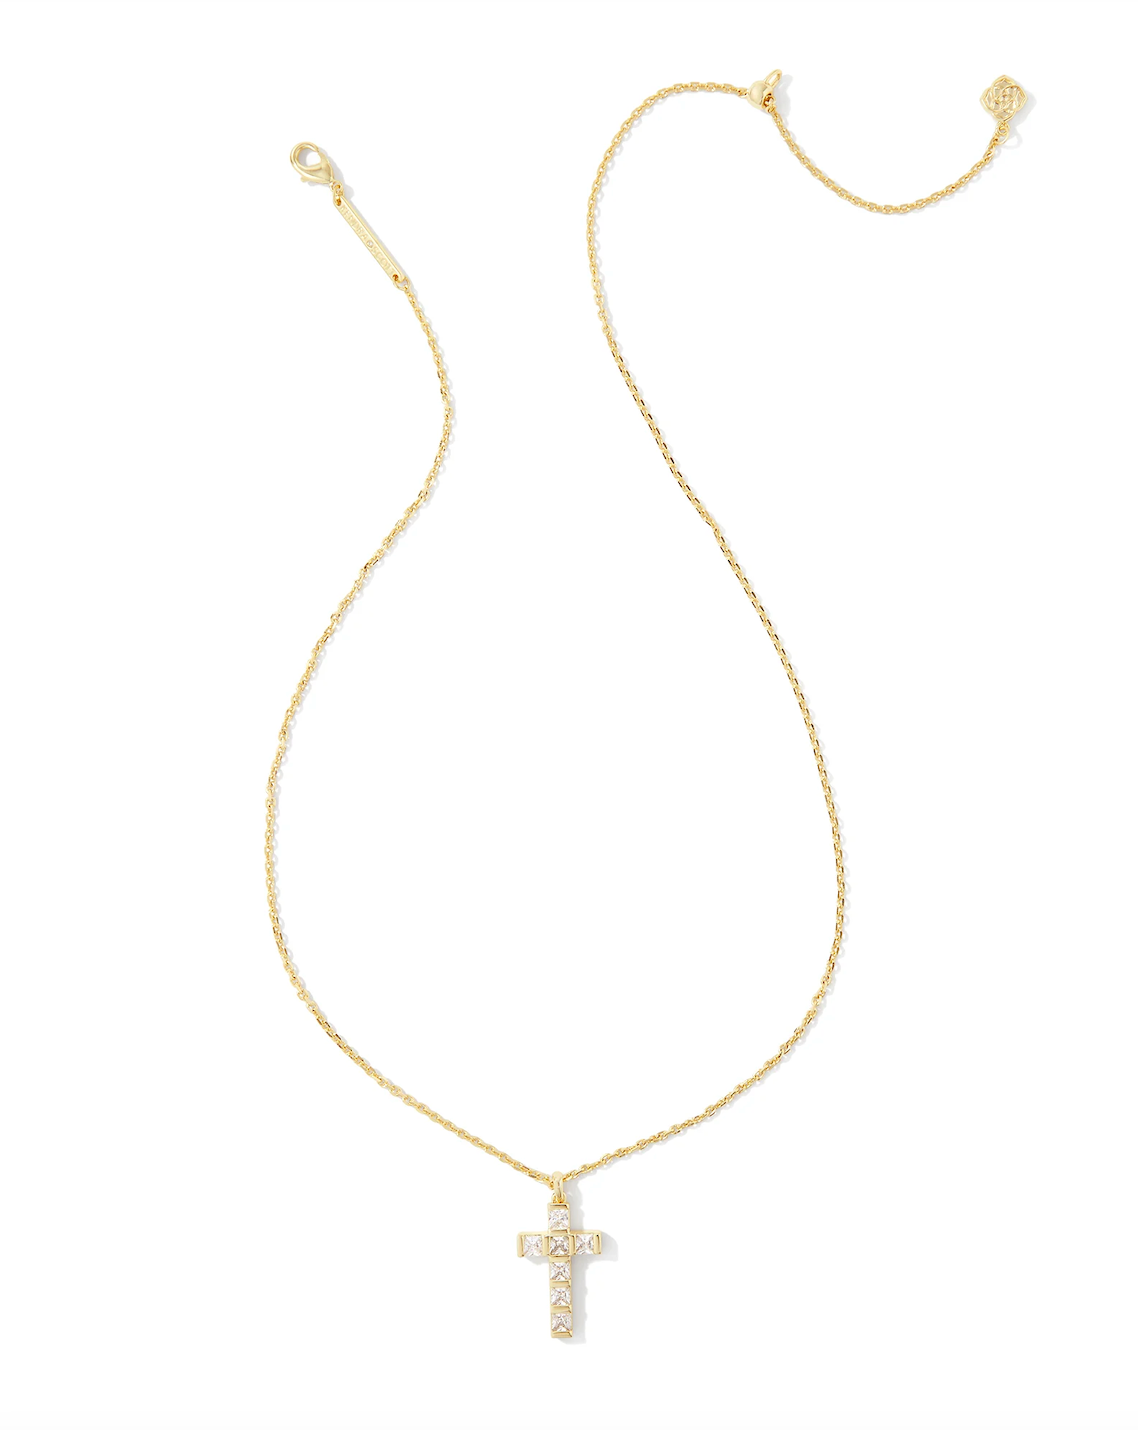 KENDRA SCOTT GRACIE GOLD CROSS SHORT PENDANT NECKLACE IN WHITE CRYSTAL